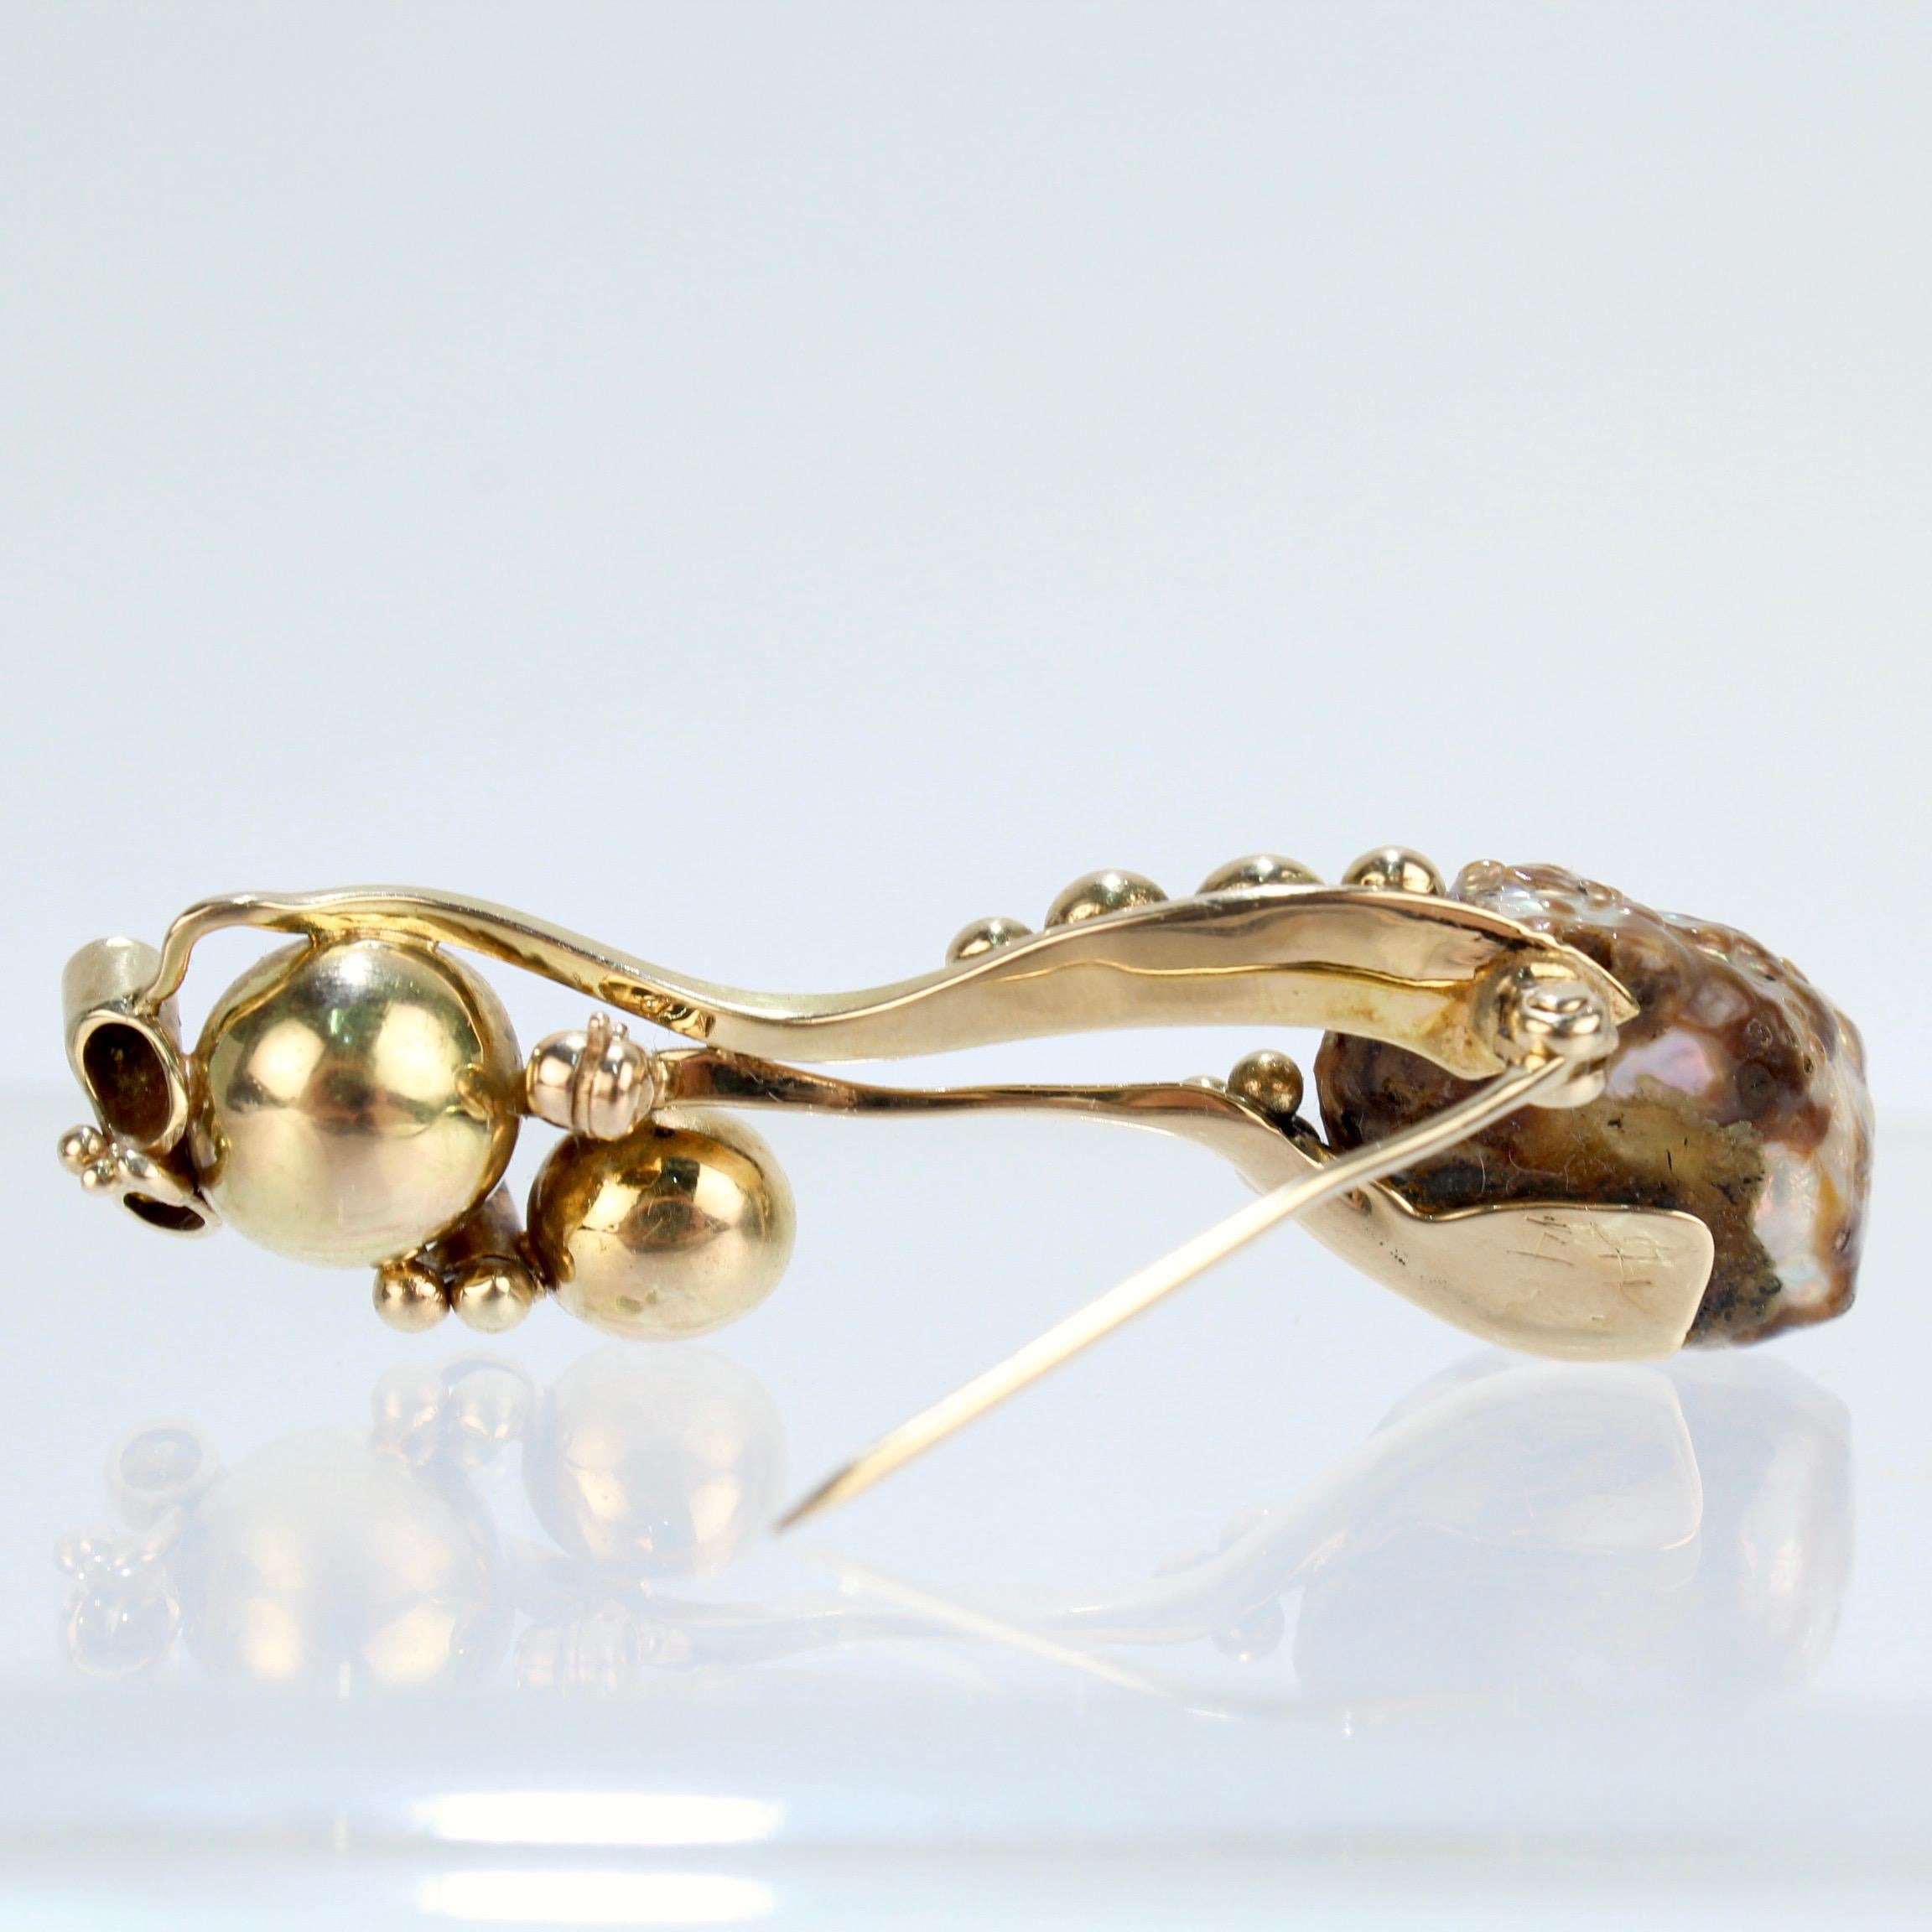 Modernist Biomorphic 14 Karat Gold Yellow Diamond & Baroque Pearl Brooch or Pin For Sale 7